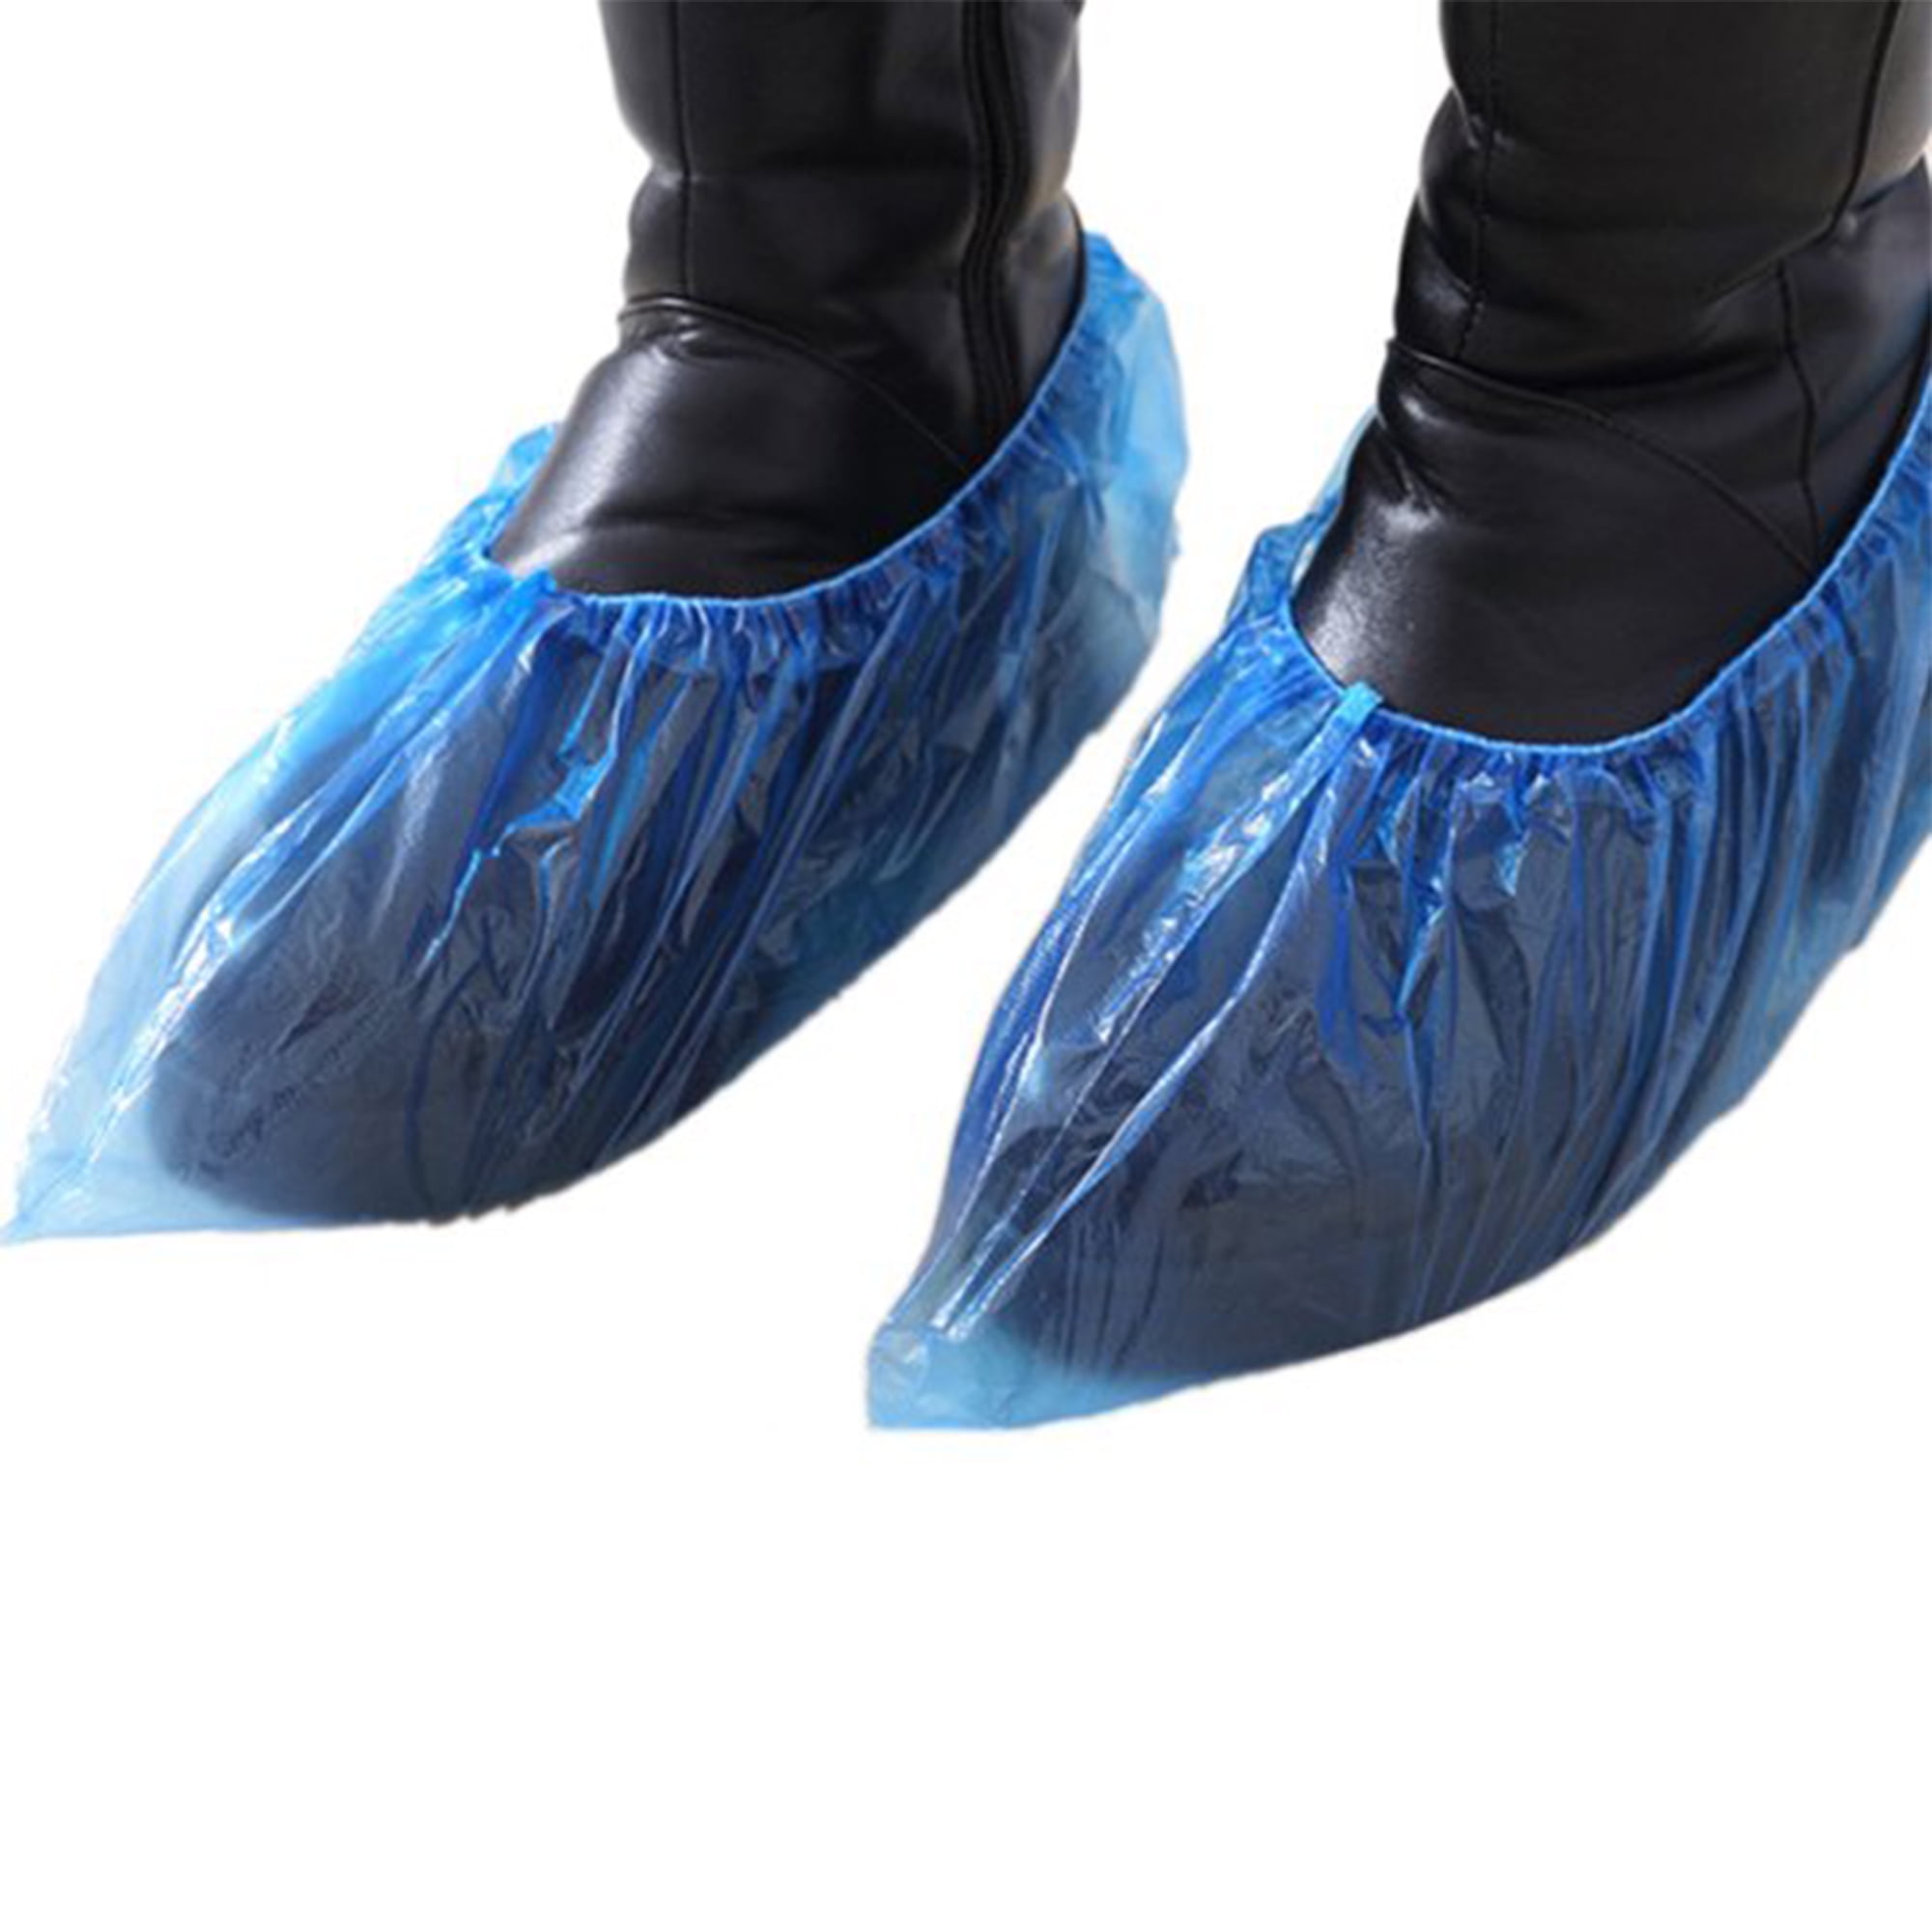 Shoe Accessories Rain Shoes Boot Covers Overshoes Plastic Boot Shoes Covers 